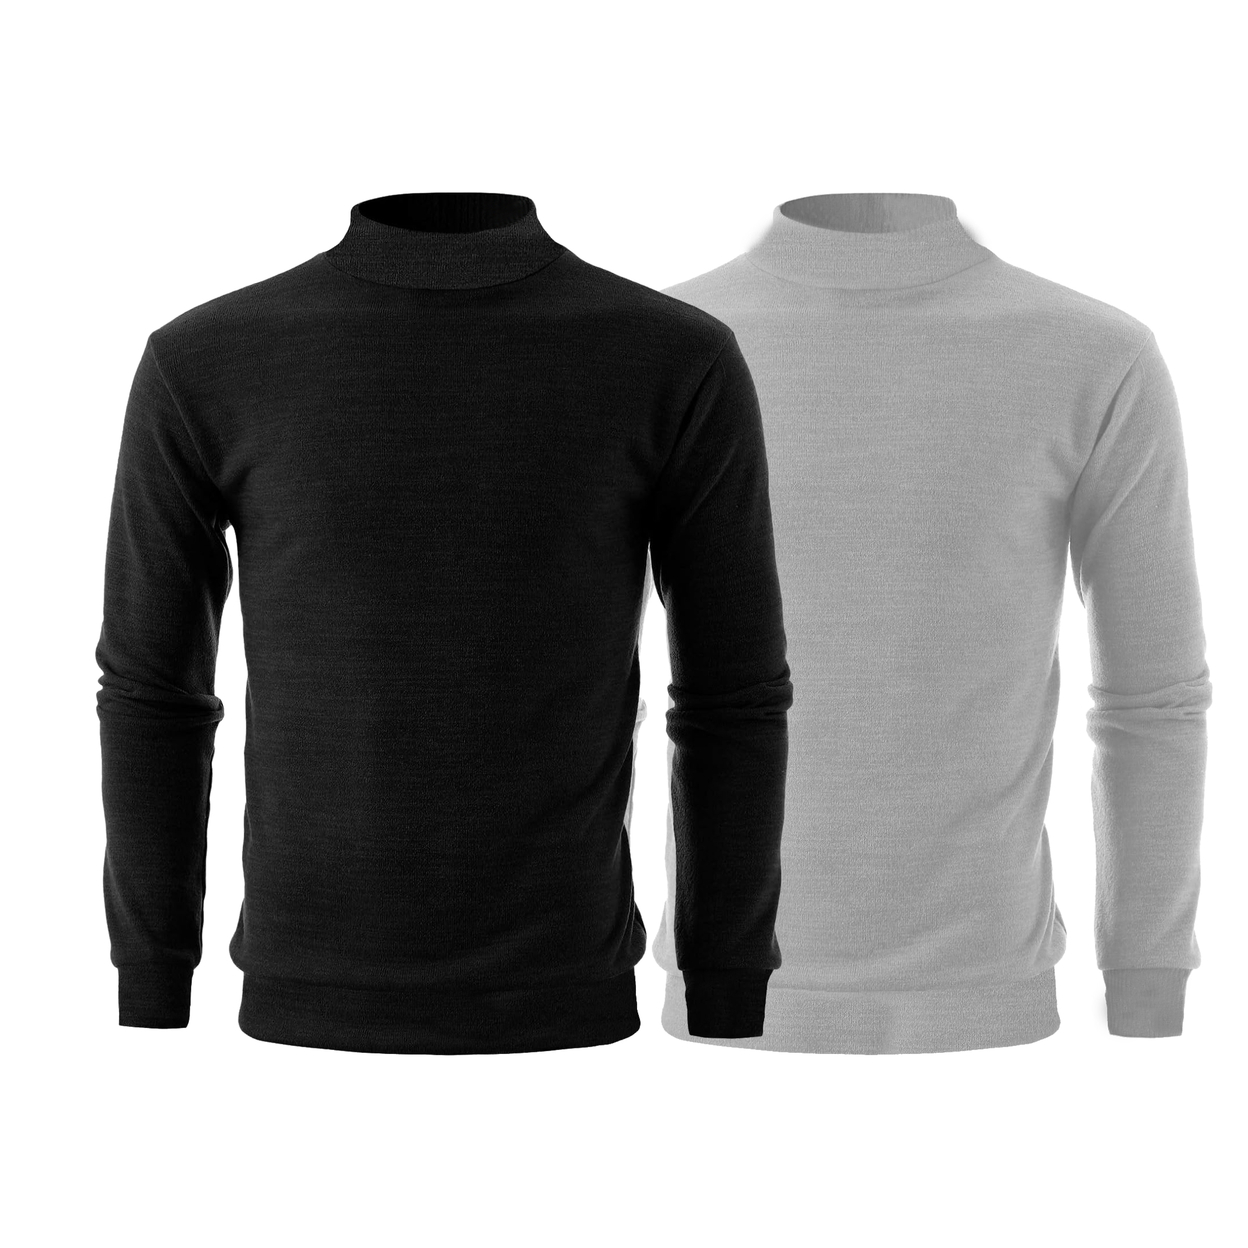 2-Pack: Men's Winter Warm Cozy Knit Slim Fit Mock Neck Sweater - White & Burgundy, Small